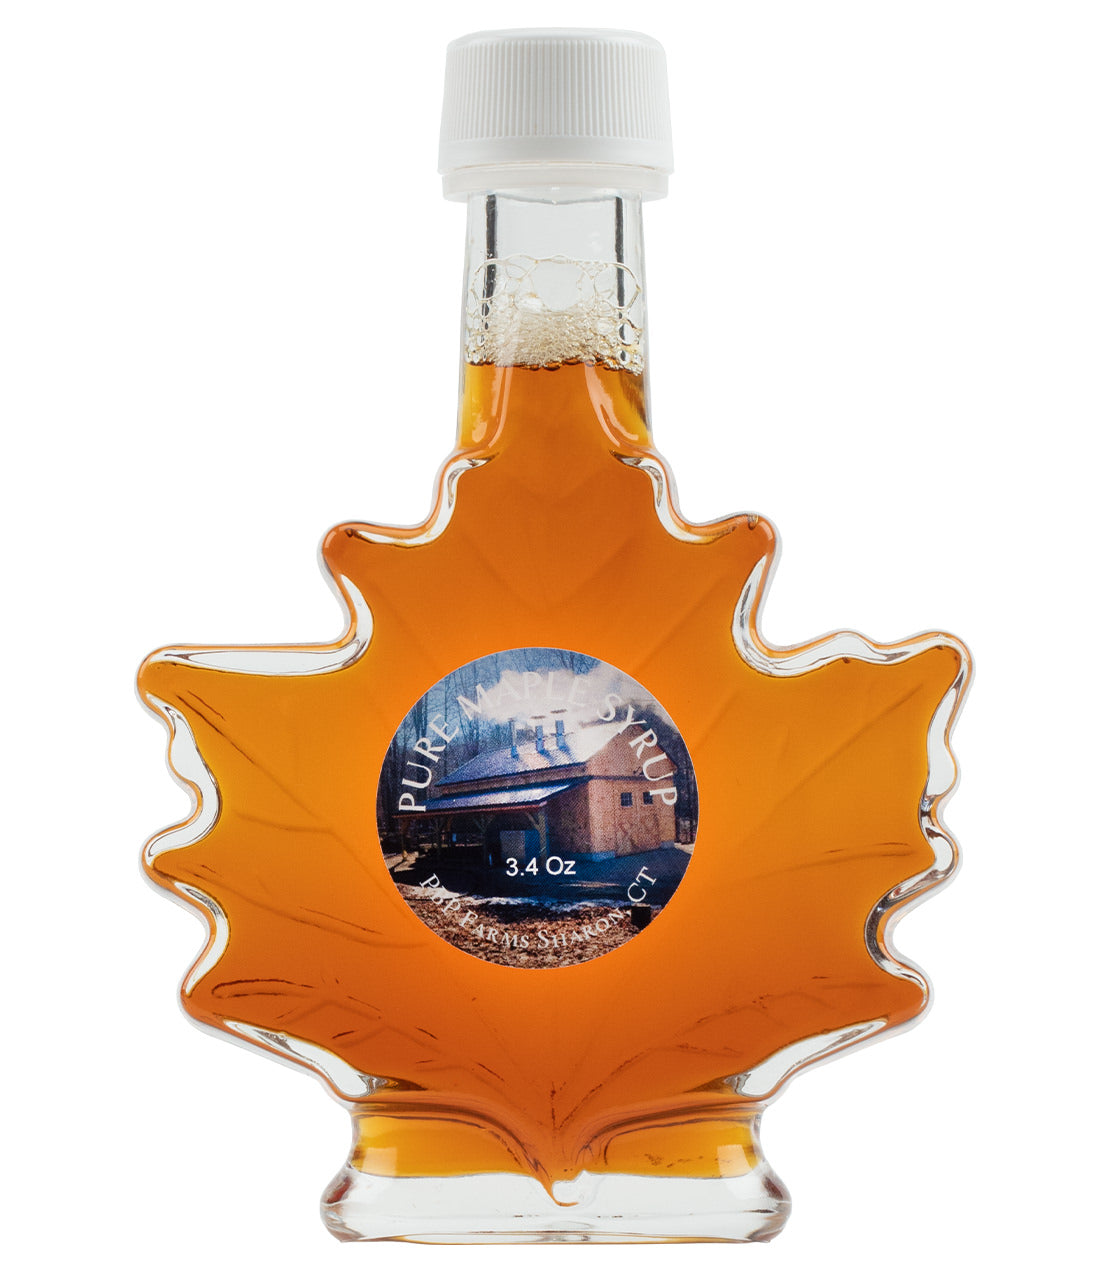 Pure Maple Syrup (Assorted) - 3.4 oz. Bottle  - Harney & Sons Fine Teas